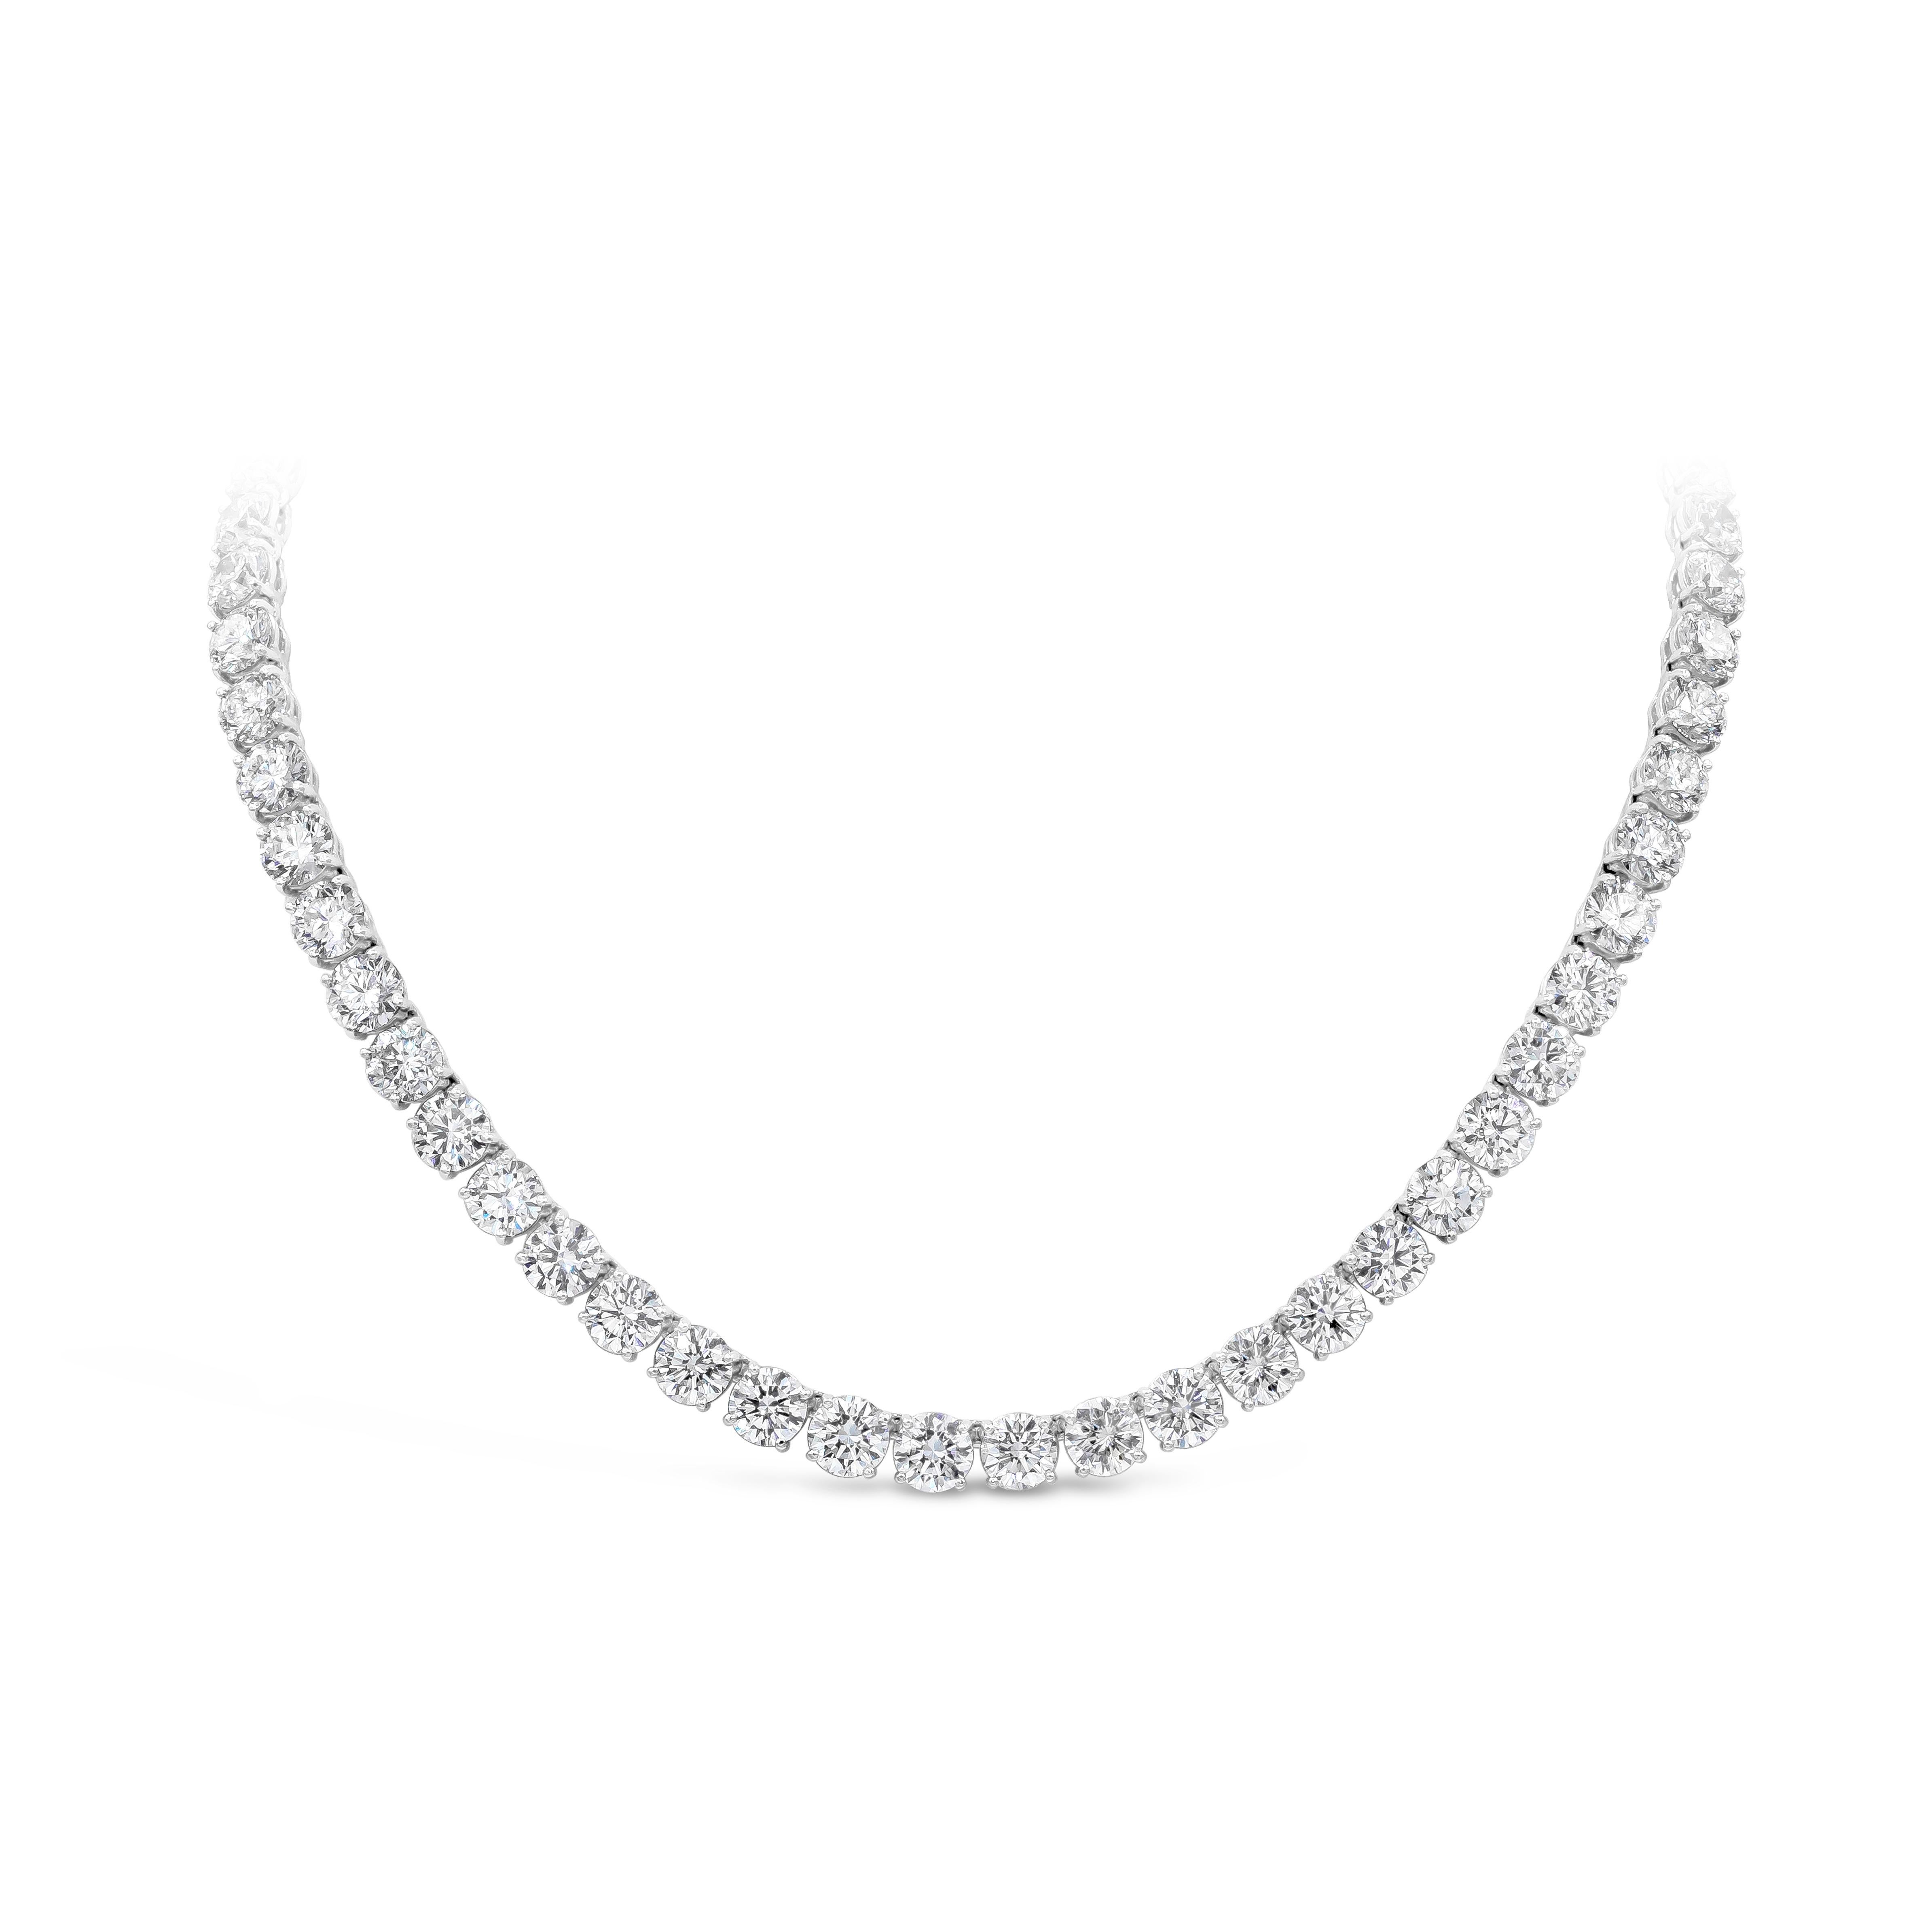 A brilliant and classic piece tennis necklace showcasing a line of round diamonds set in polished platinum. All the diamonds in this necklace is GIA certified and weighs 60.62 carats total. 16 inches in length.

Roman Malakov is a custom house,